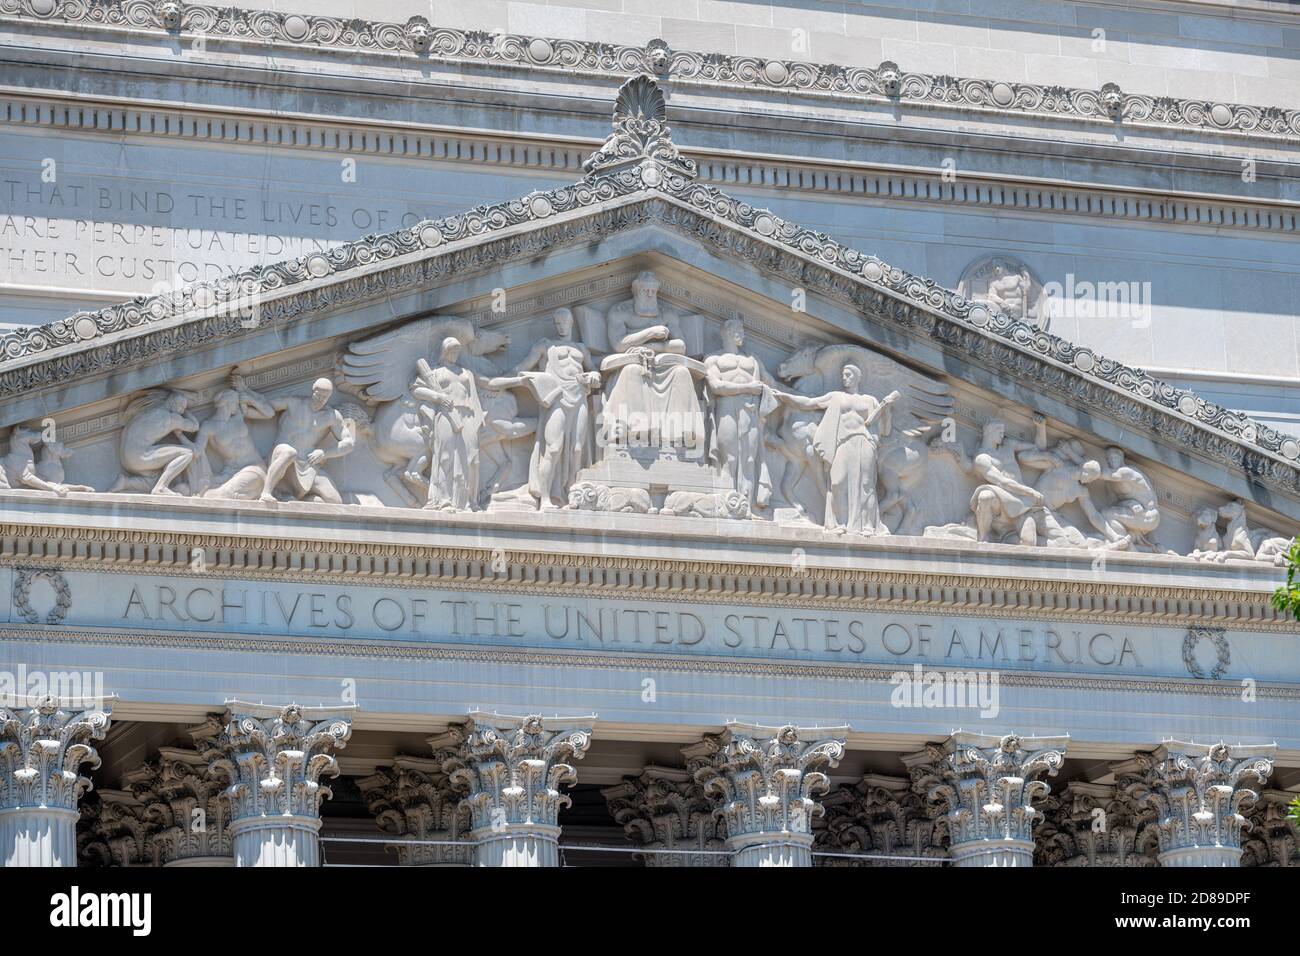 James Earle Fraser's 'Recorder of the Archive' fills the ornate pediment over the entrance to John Russell Pope's National Archives Building. Stock Photo